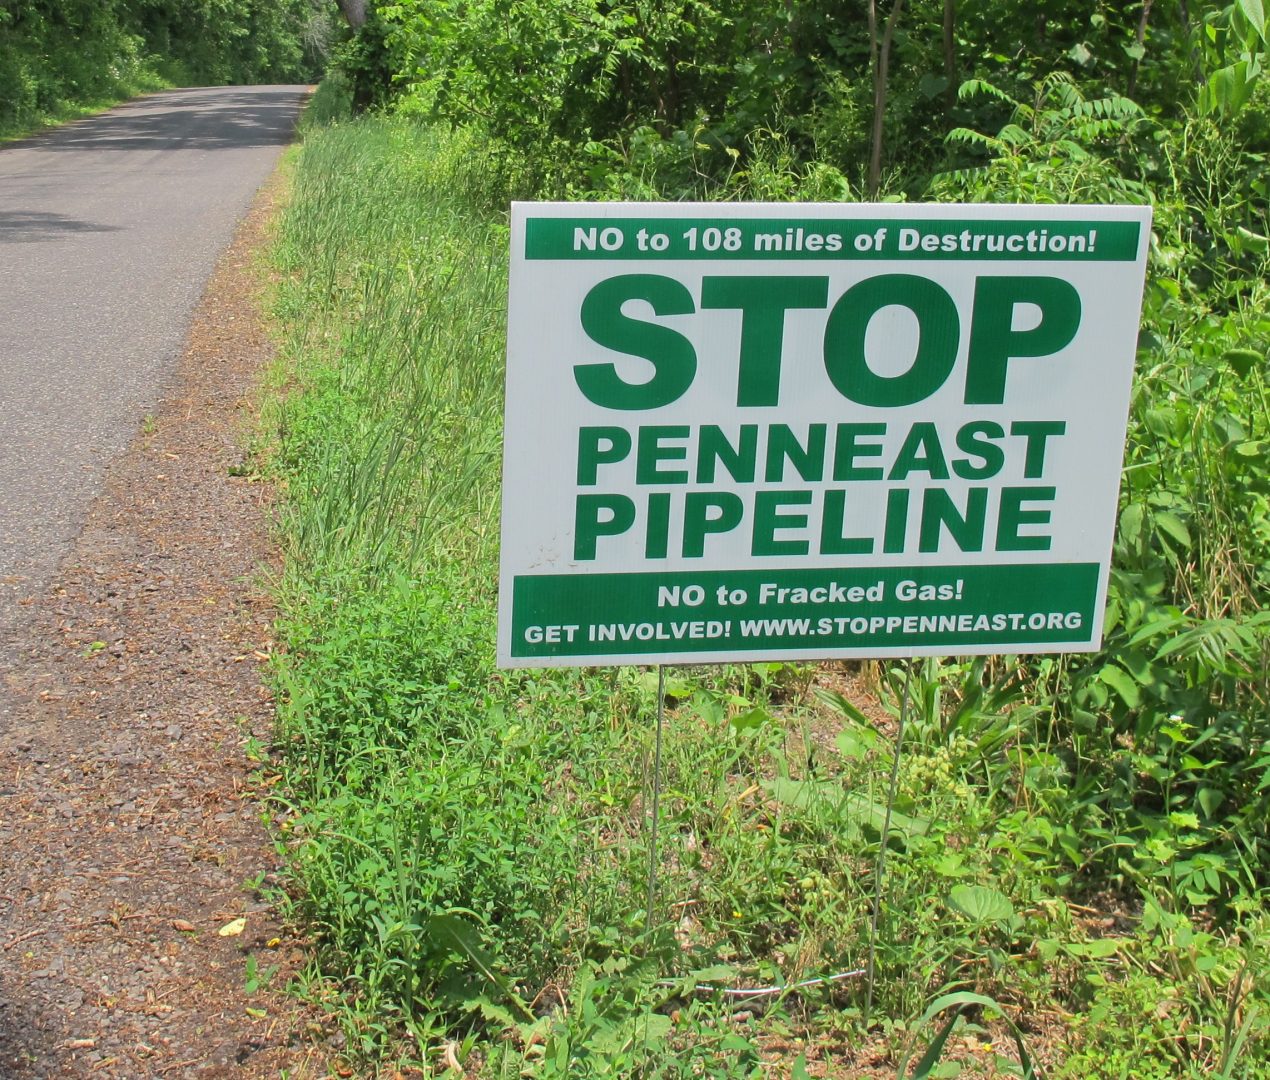 A yard sign opposing the planned PennEast pipeline. New Jersey officials said they need much more information before making a decision on permits.